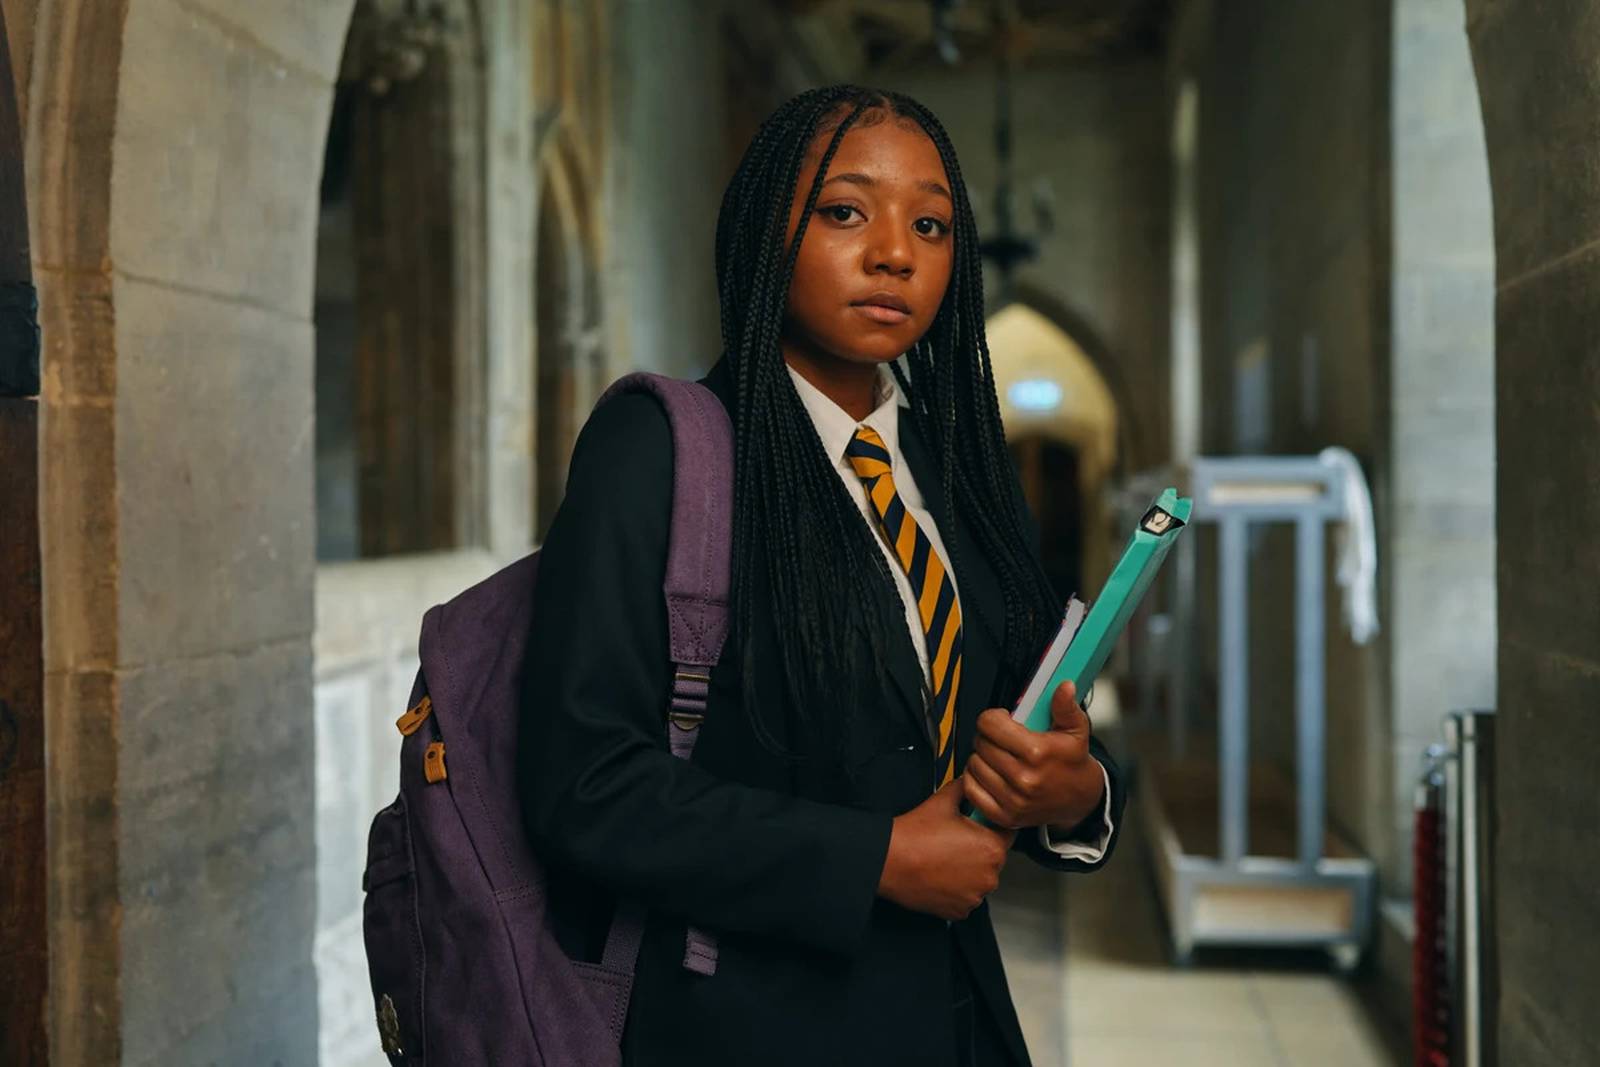 Lashay Anderson as Natasha in Channel 4's programme, Consent. Photograph: Channel 4